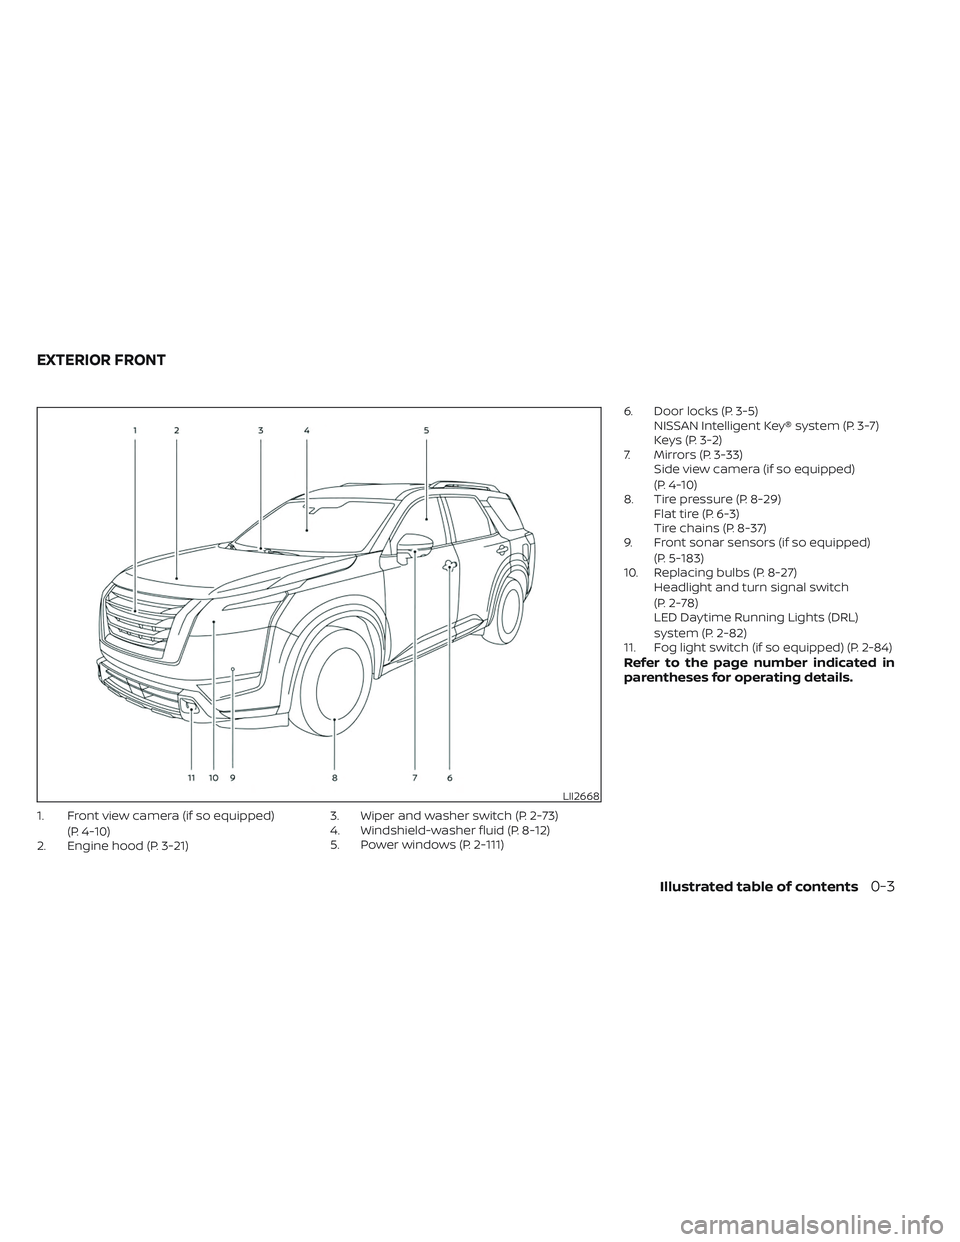 NISSAN PATHFINDER 2022  Owner´s Manual 1. Front view camera (if so equipped)(P. 4-10)
2. Engine hood (P. 3-21) 3. Wiper and washer switch (P. 2-73)
4. Windshield-washer fluid (P. 8-12)
5. Power windows (P. 2-111)6. Door locks (P. 3-5)
NISS